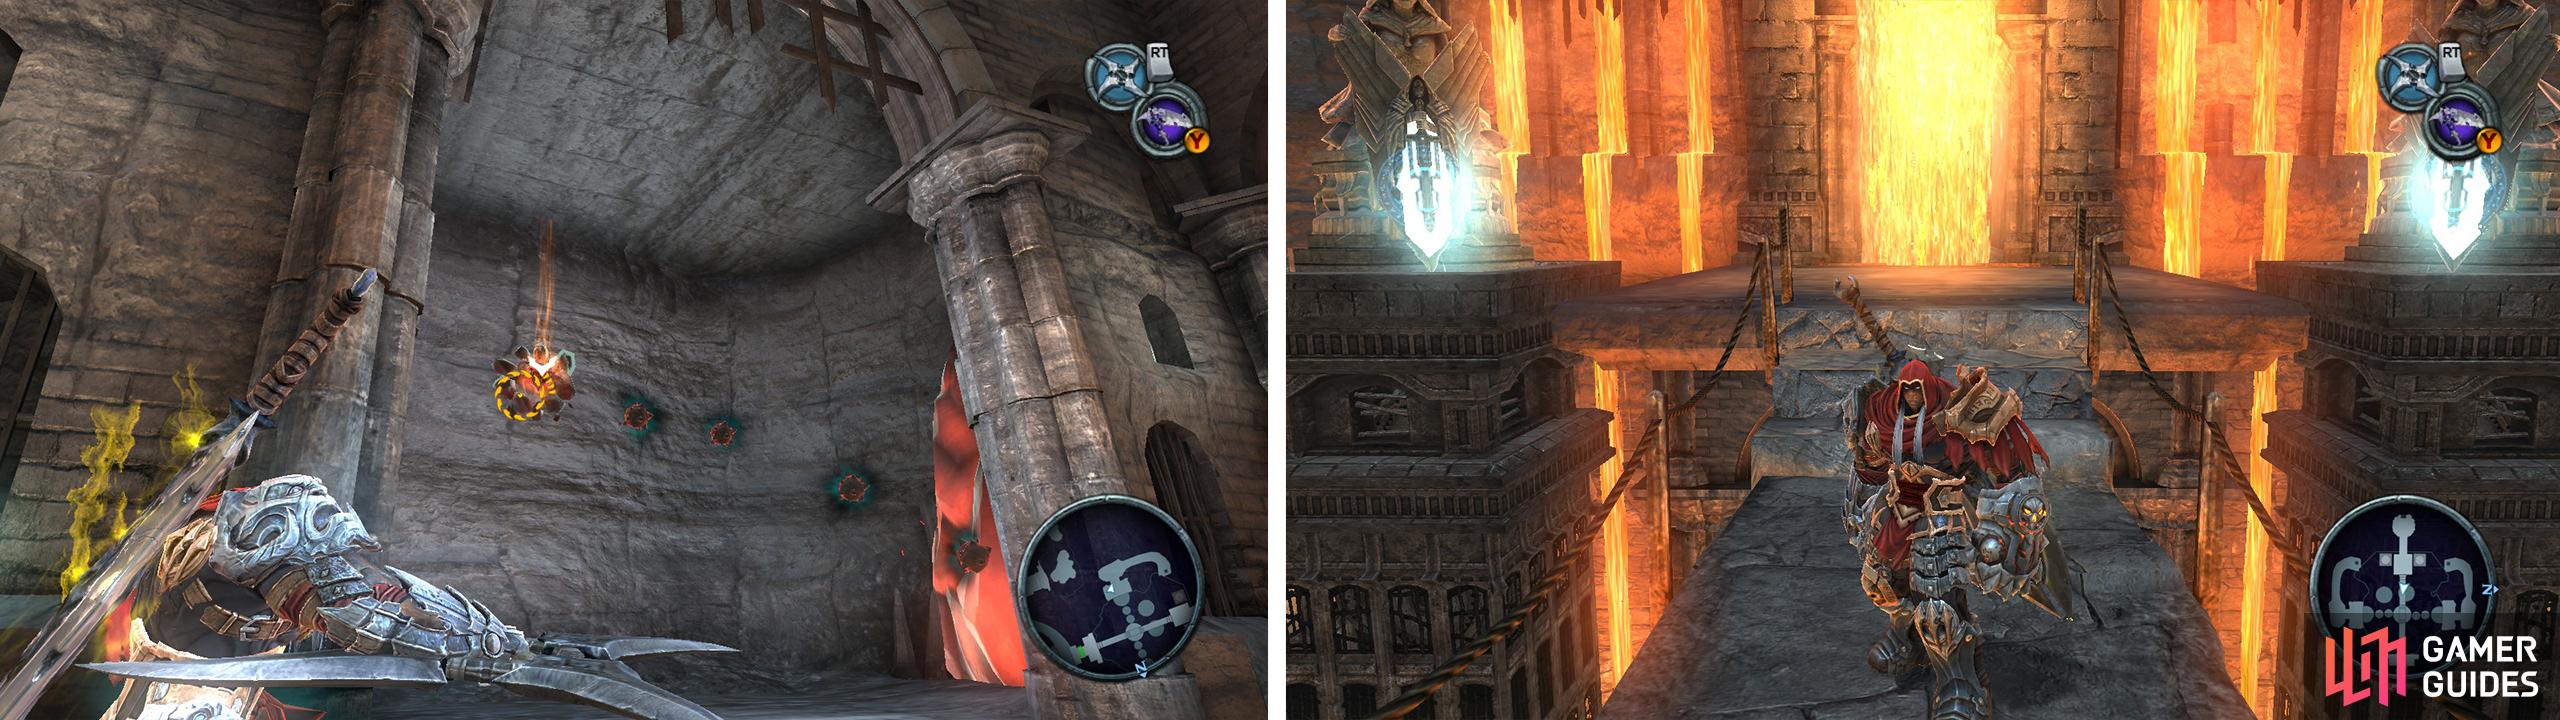 Create a chain of bombs to detonate the red crystal (left). Hit both switches at once at the end of the room (right) to reveal a Crystal Sword.